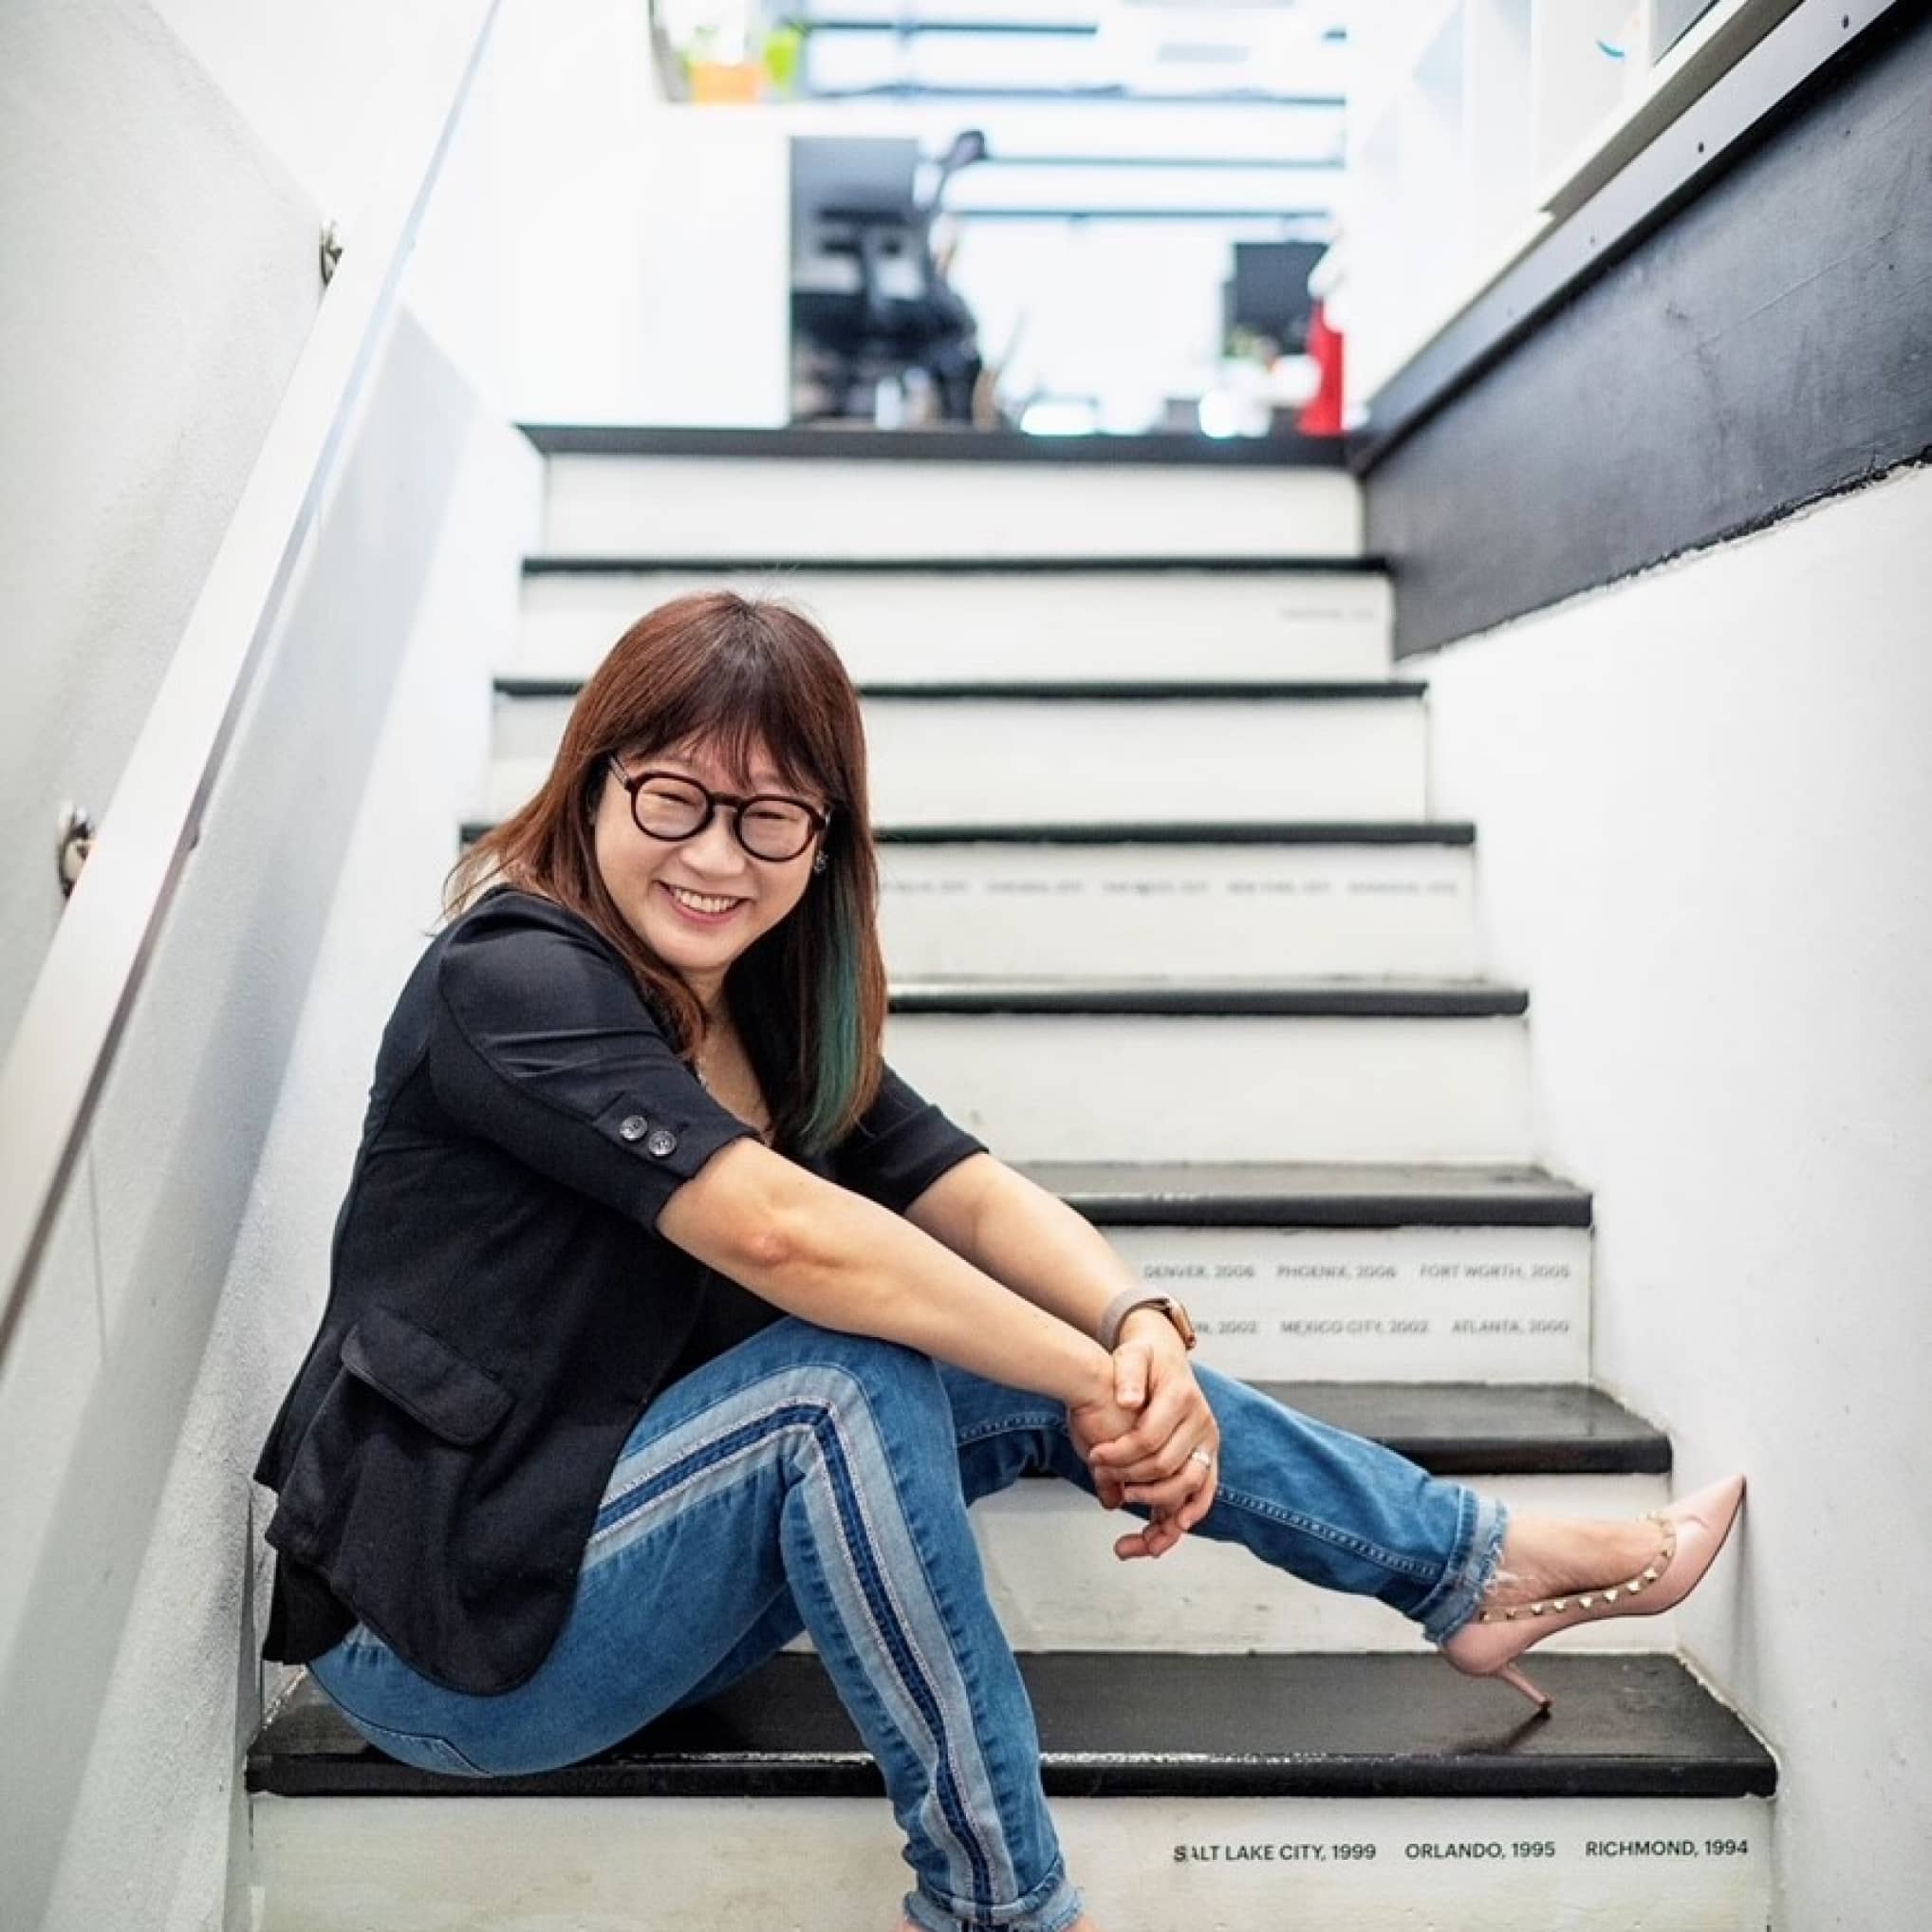 HKS’ Angela Lee Goes Global with Thoughtful Health Care Designs